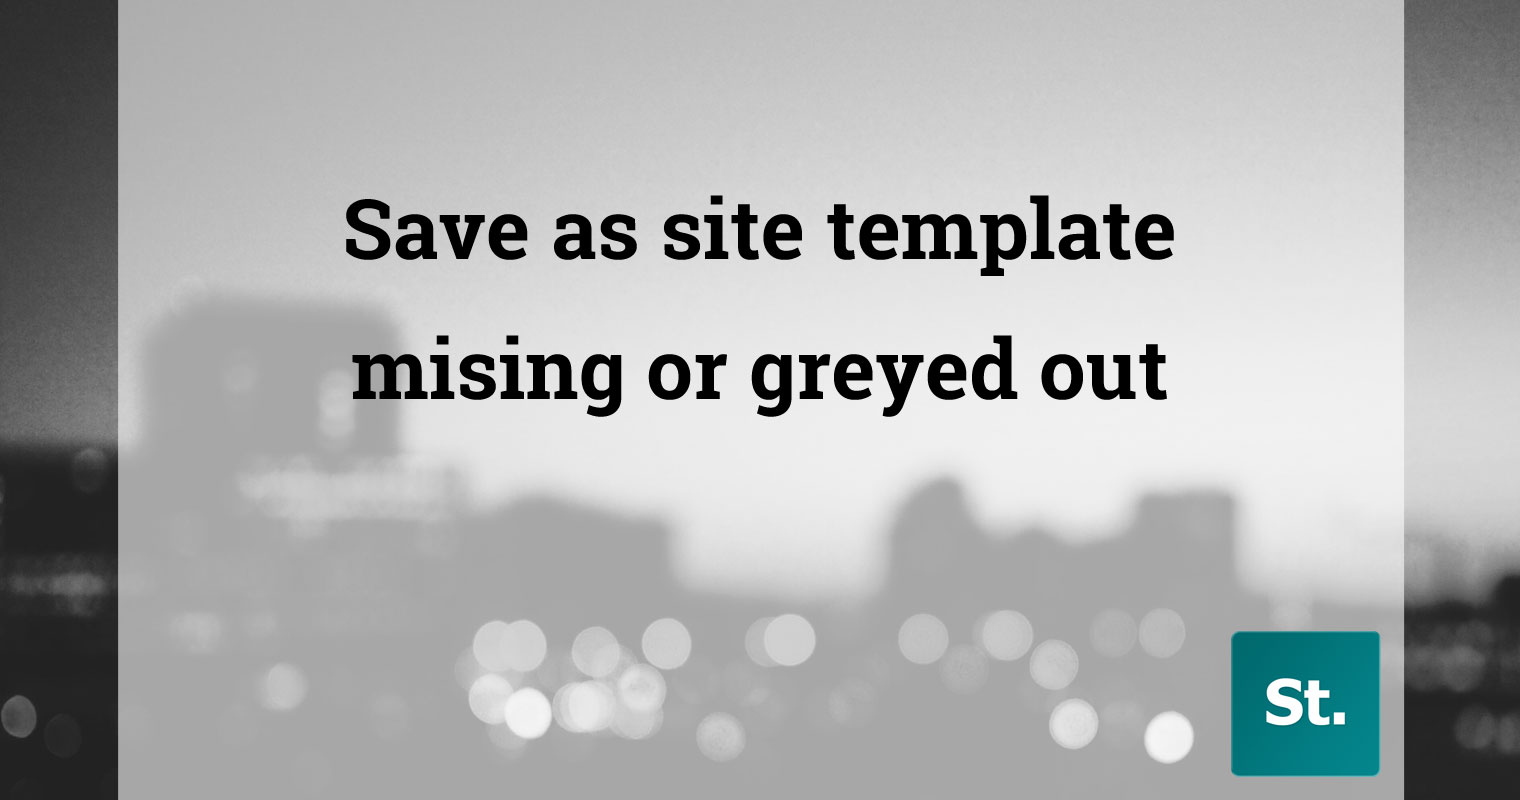 Save as site template missing or greyed out